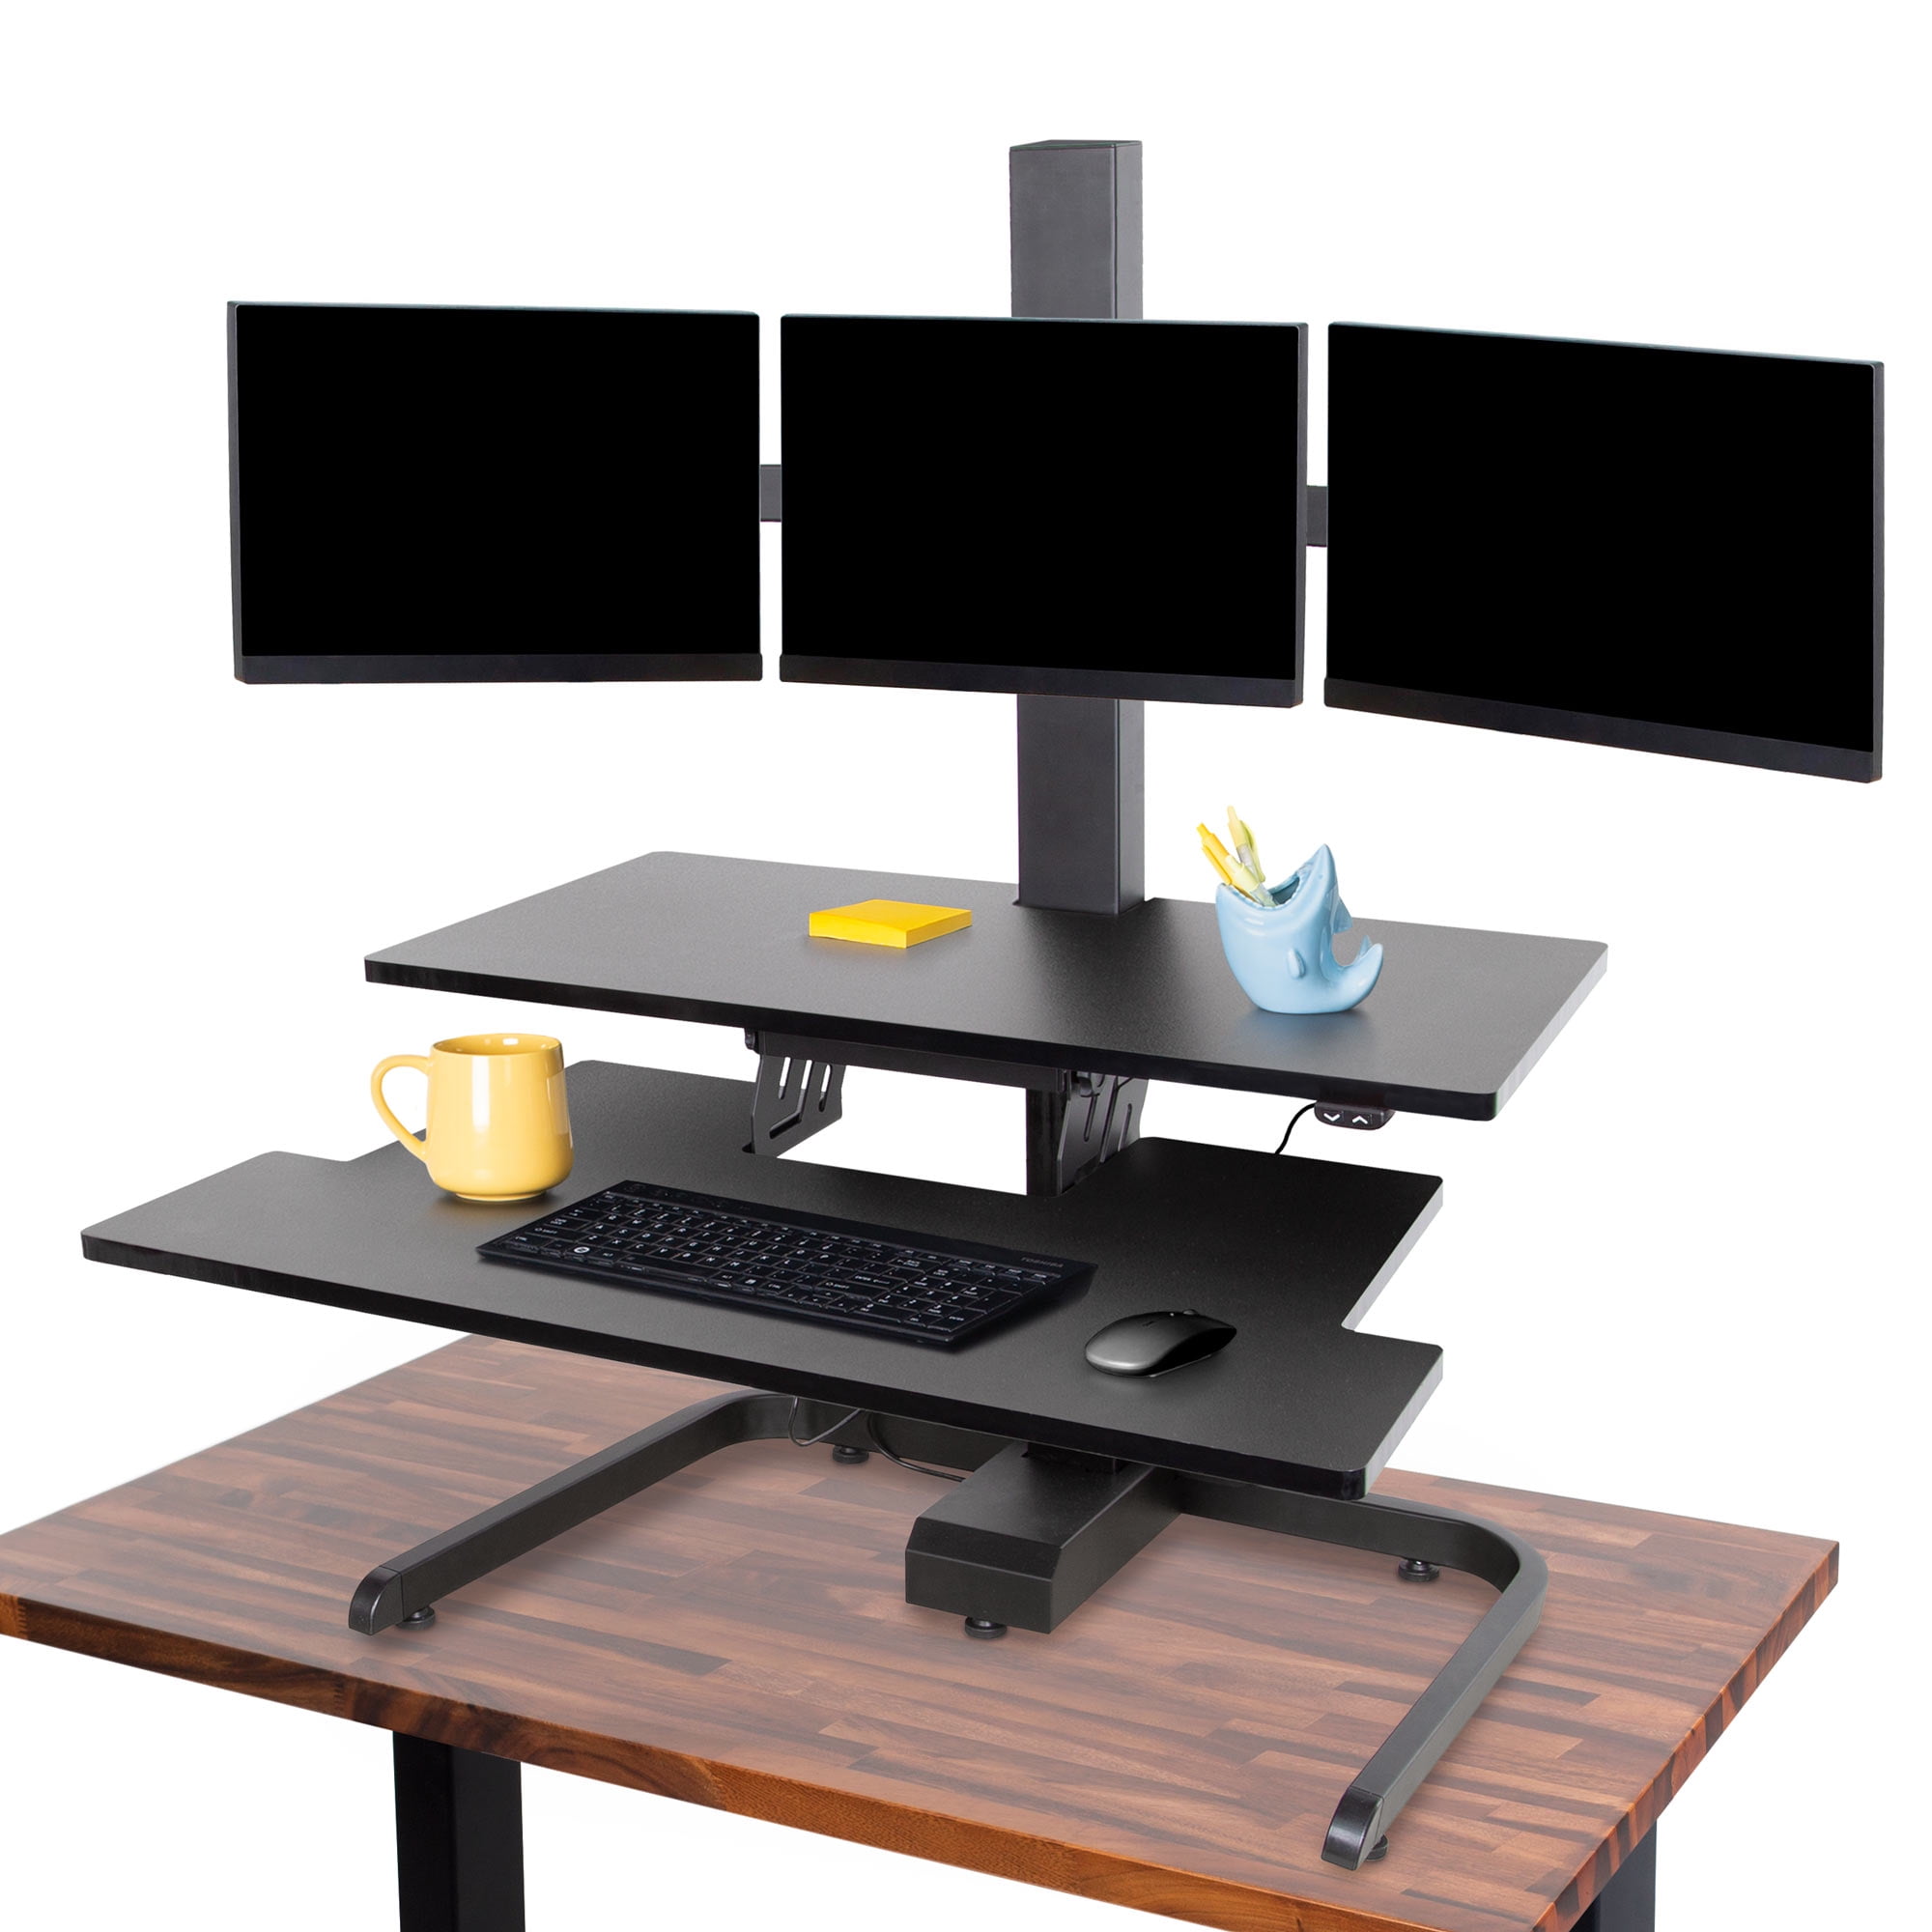 Stand Steady Momentum Two Level Standing Desk Sit-Stand Desk with Keyboard Tray & Bonus Tablet Slot Easily Adjustable Sit to Stand Desk with Gas Spring Lift Black 32 Sleek Modern Design 